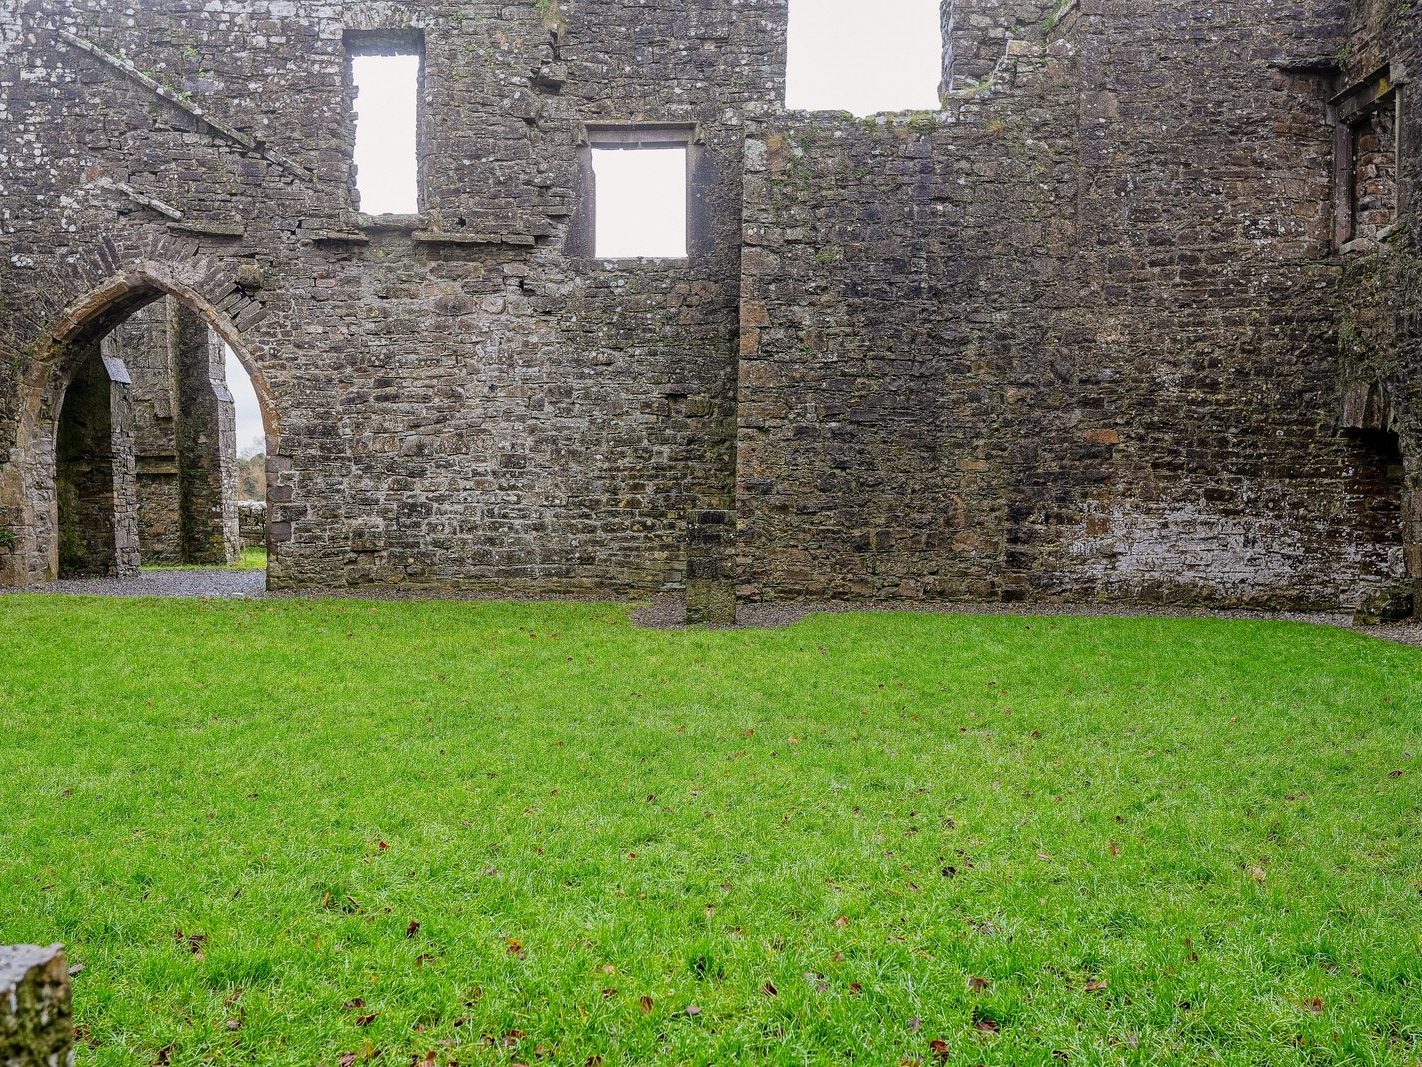 BECTIVE ABBEY WHICH I VISITED LAST CHRISTMAS [THERE WERE NO OTHER VISITORS AS IT WAS A VERY WET DAY]--225234-1